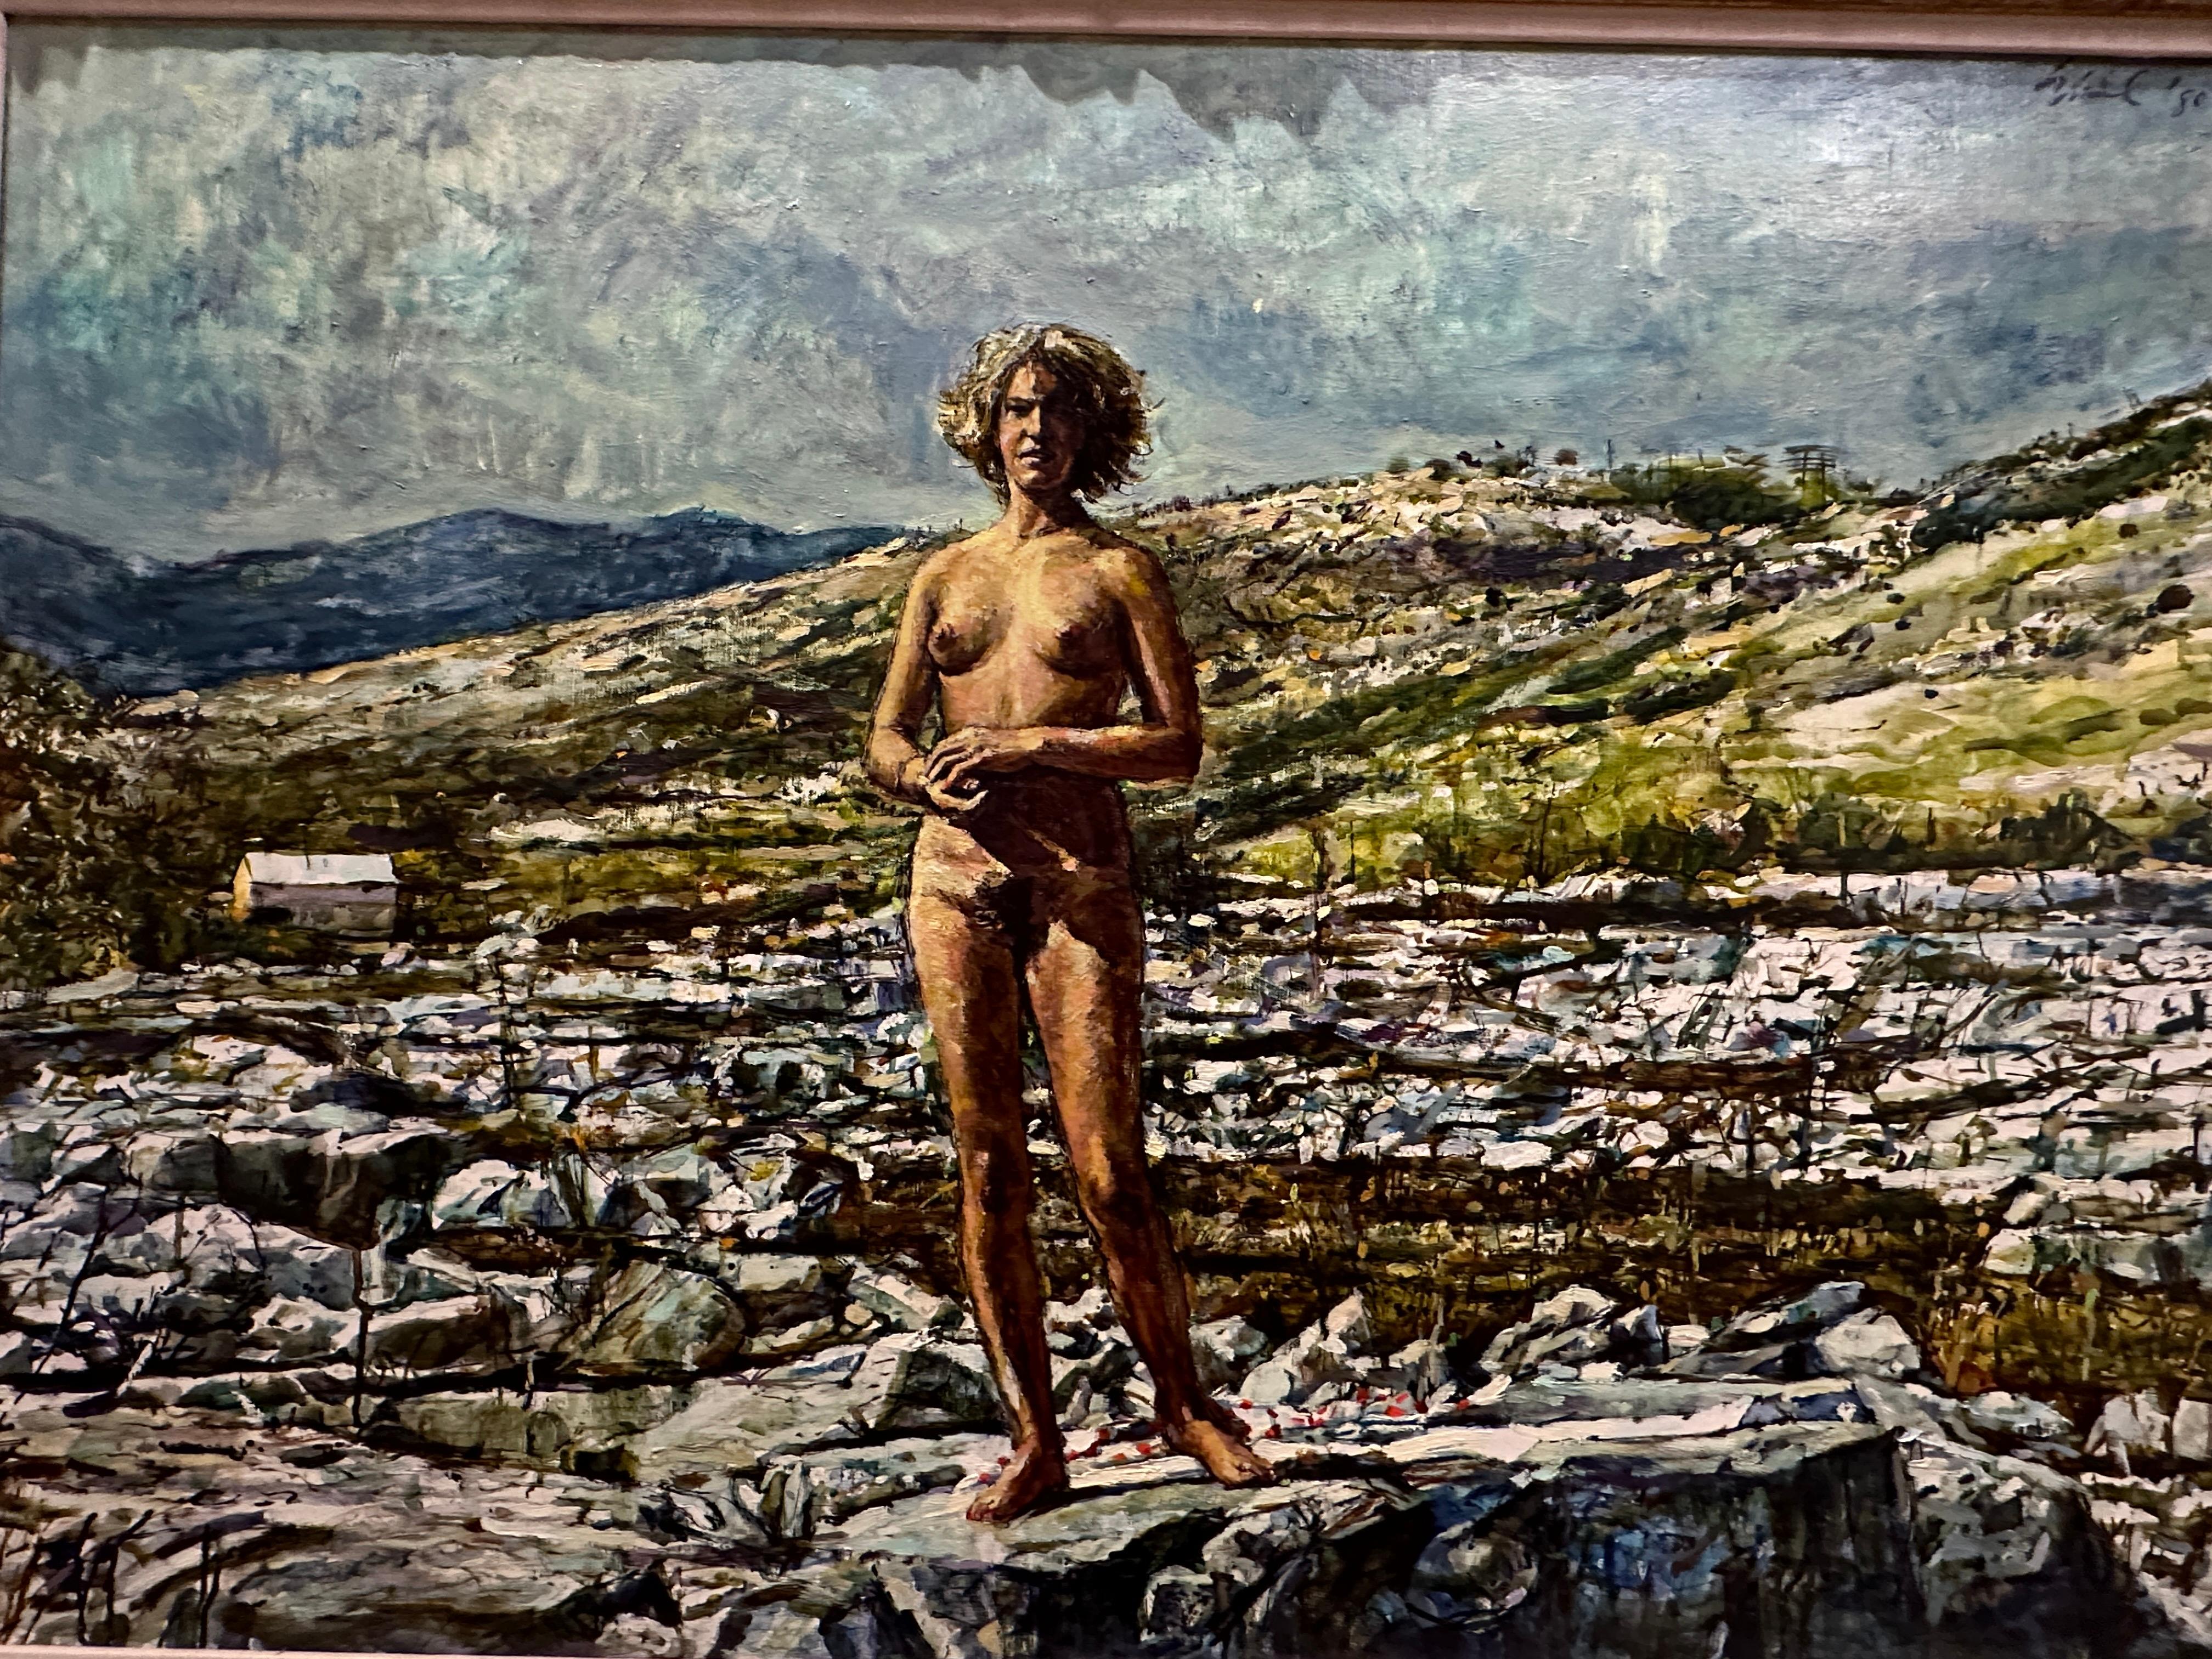 Nude Free Woman in a Rocky Mountain Landscape - Painting by Unknown